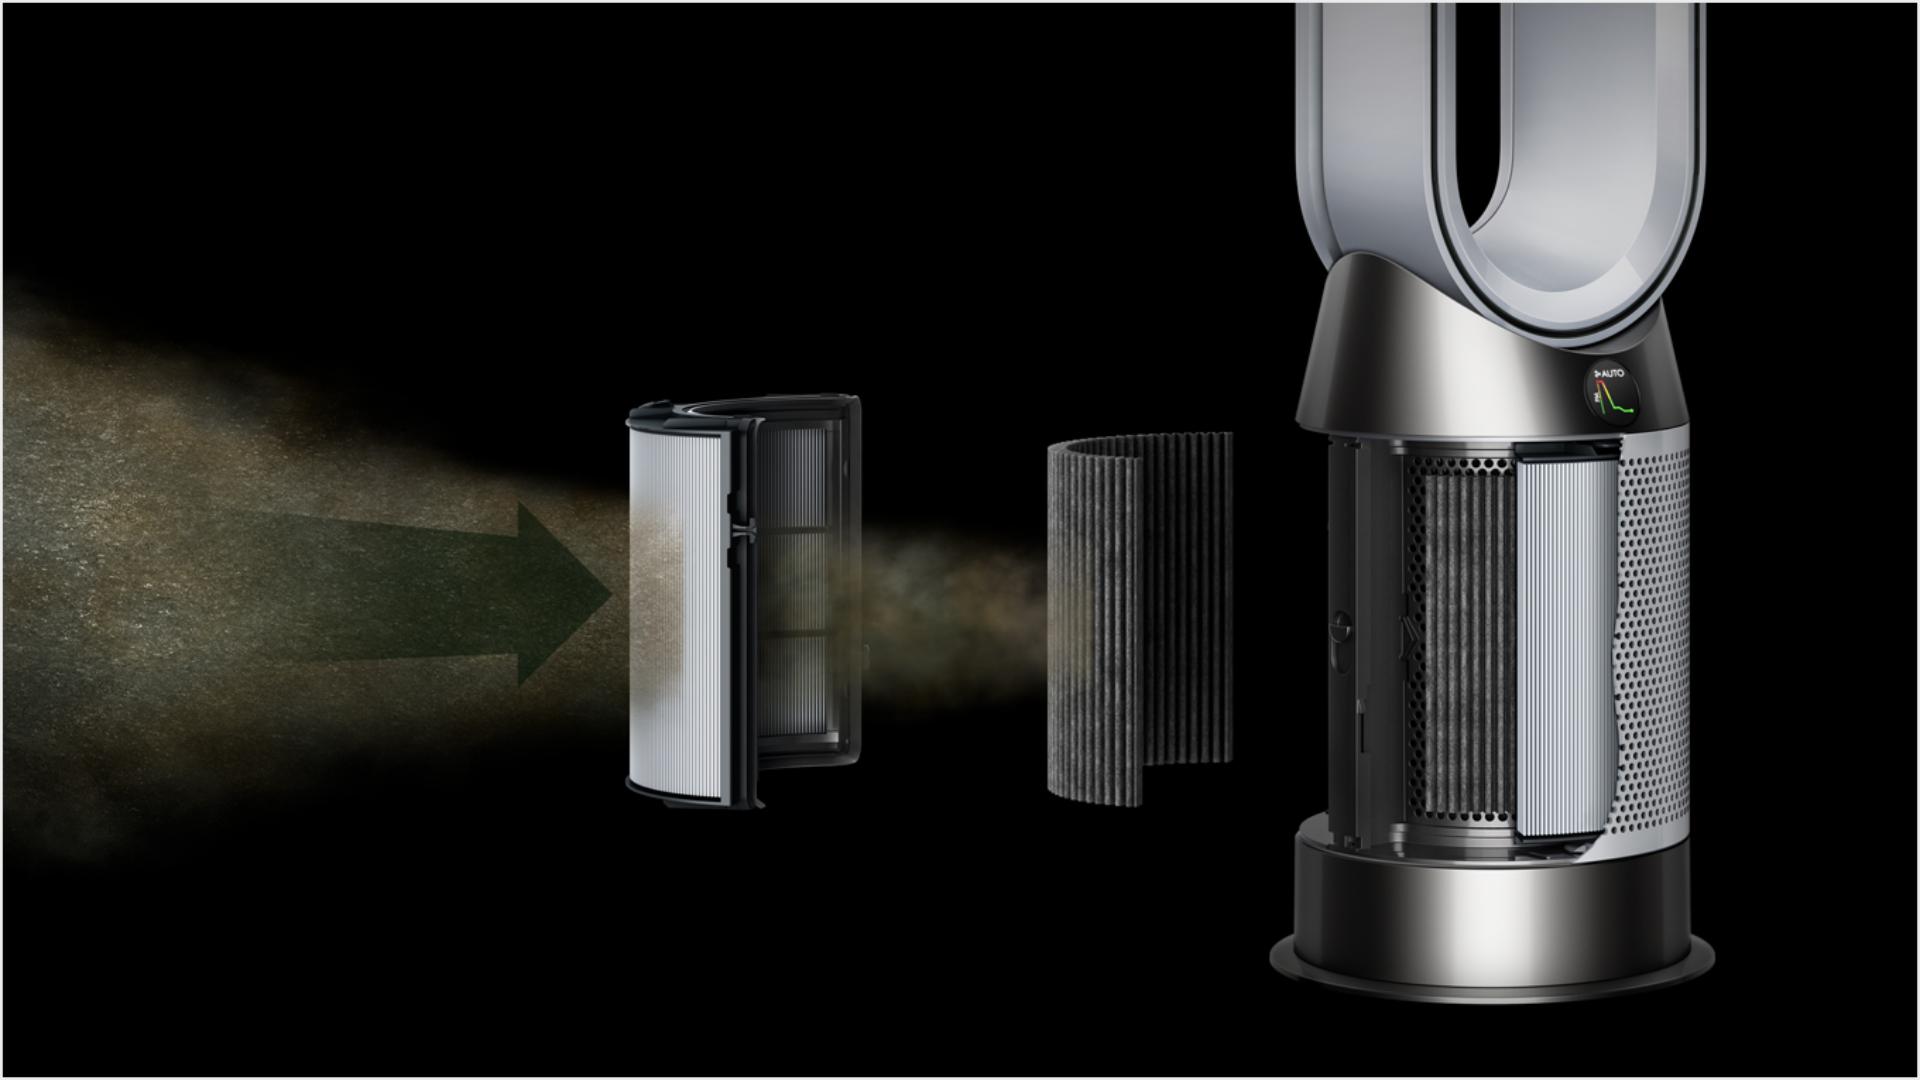 The filters within a Dyson purifier.